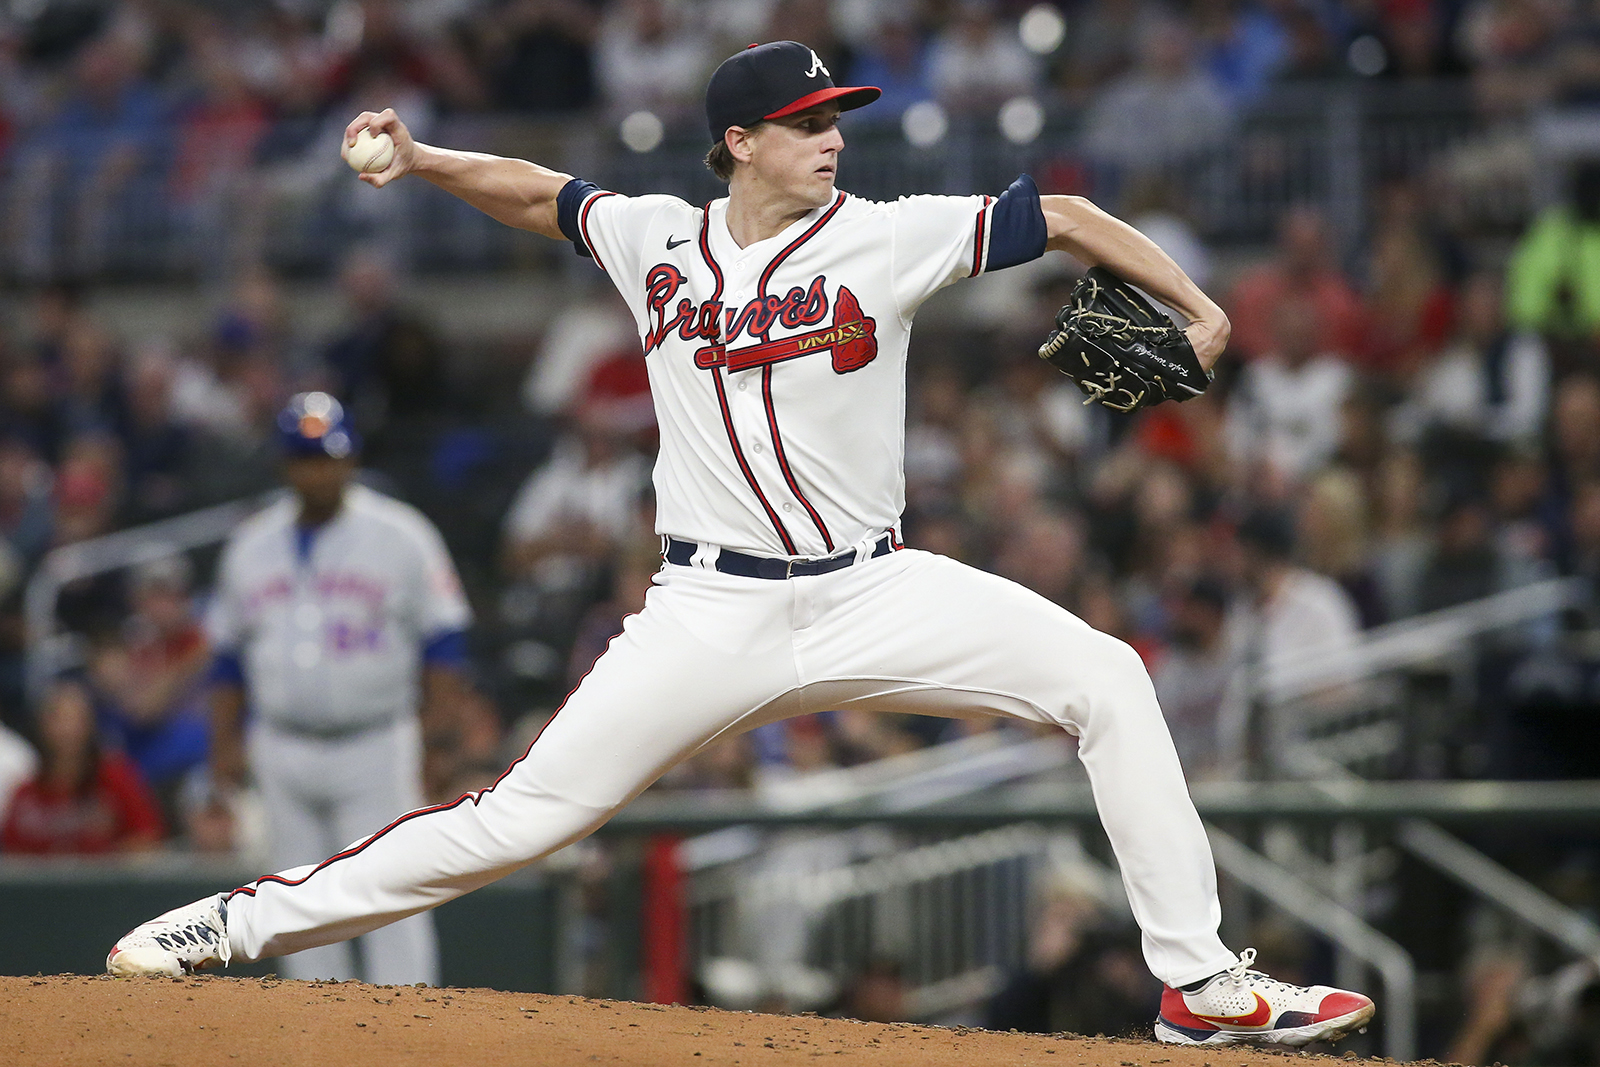 Kyle Wright returns to Braves with new look